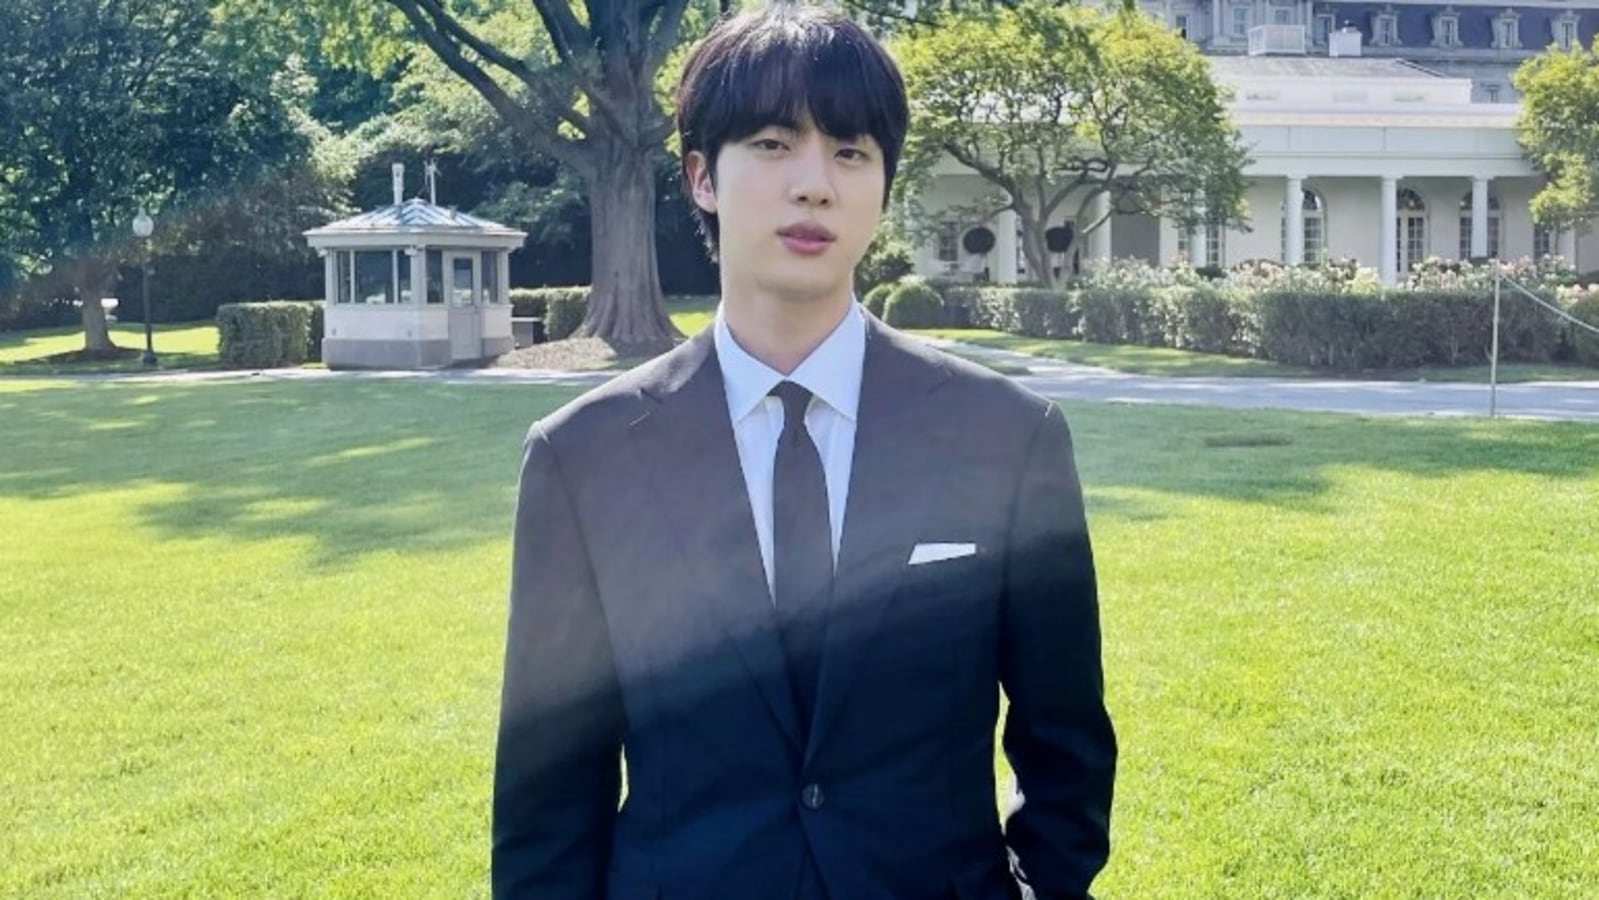 BTS's Jin Proudly Showed Off His Vacation Outfit—And He Even Gave